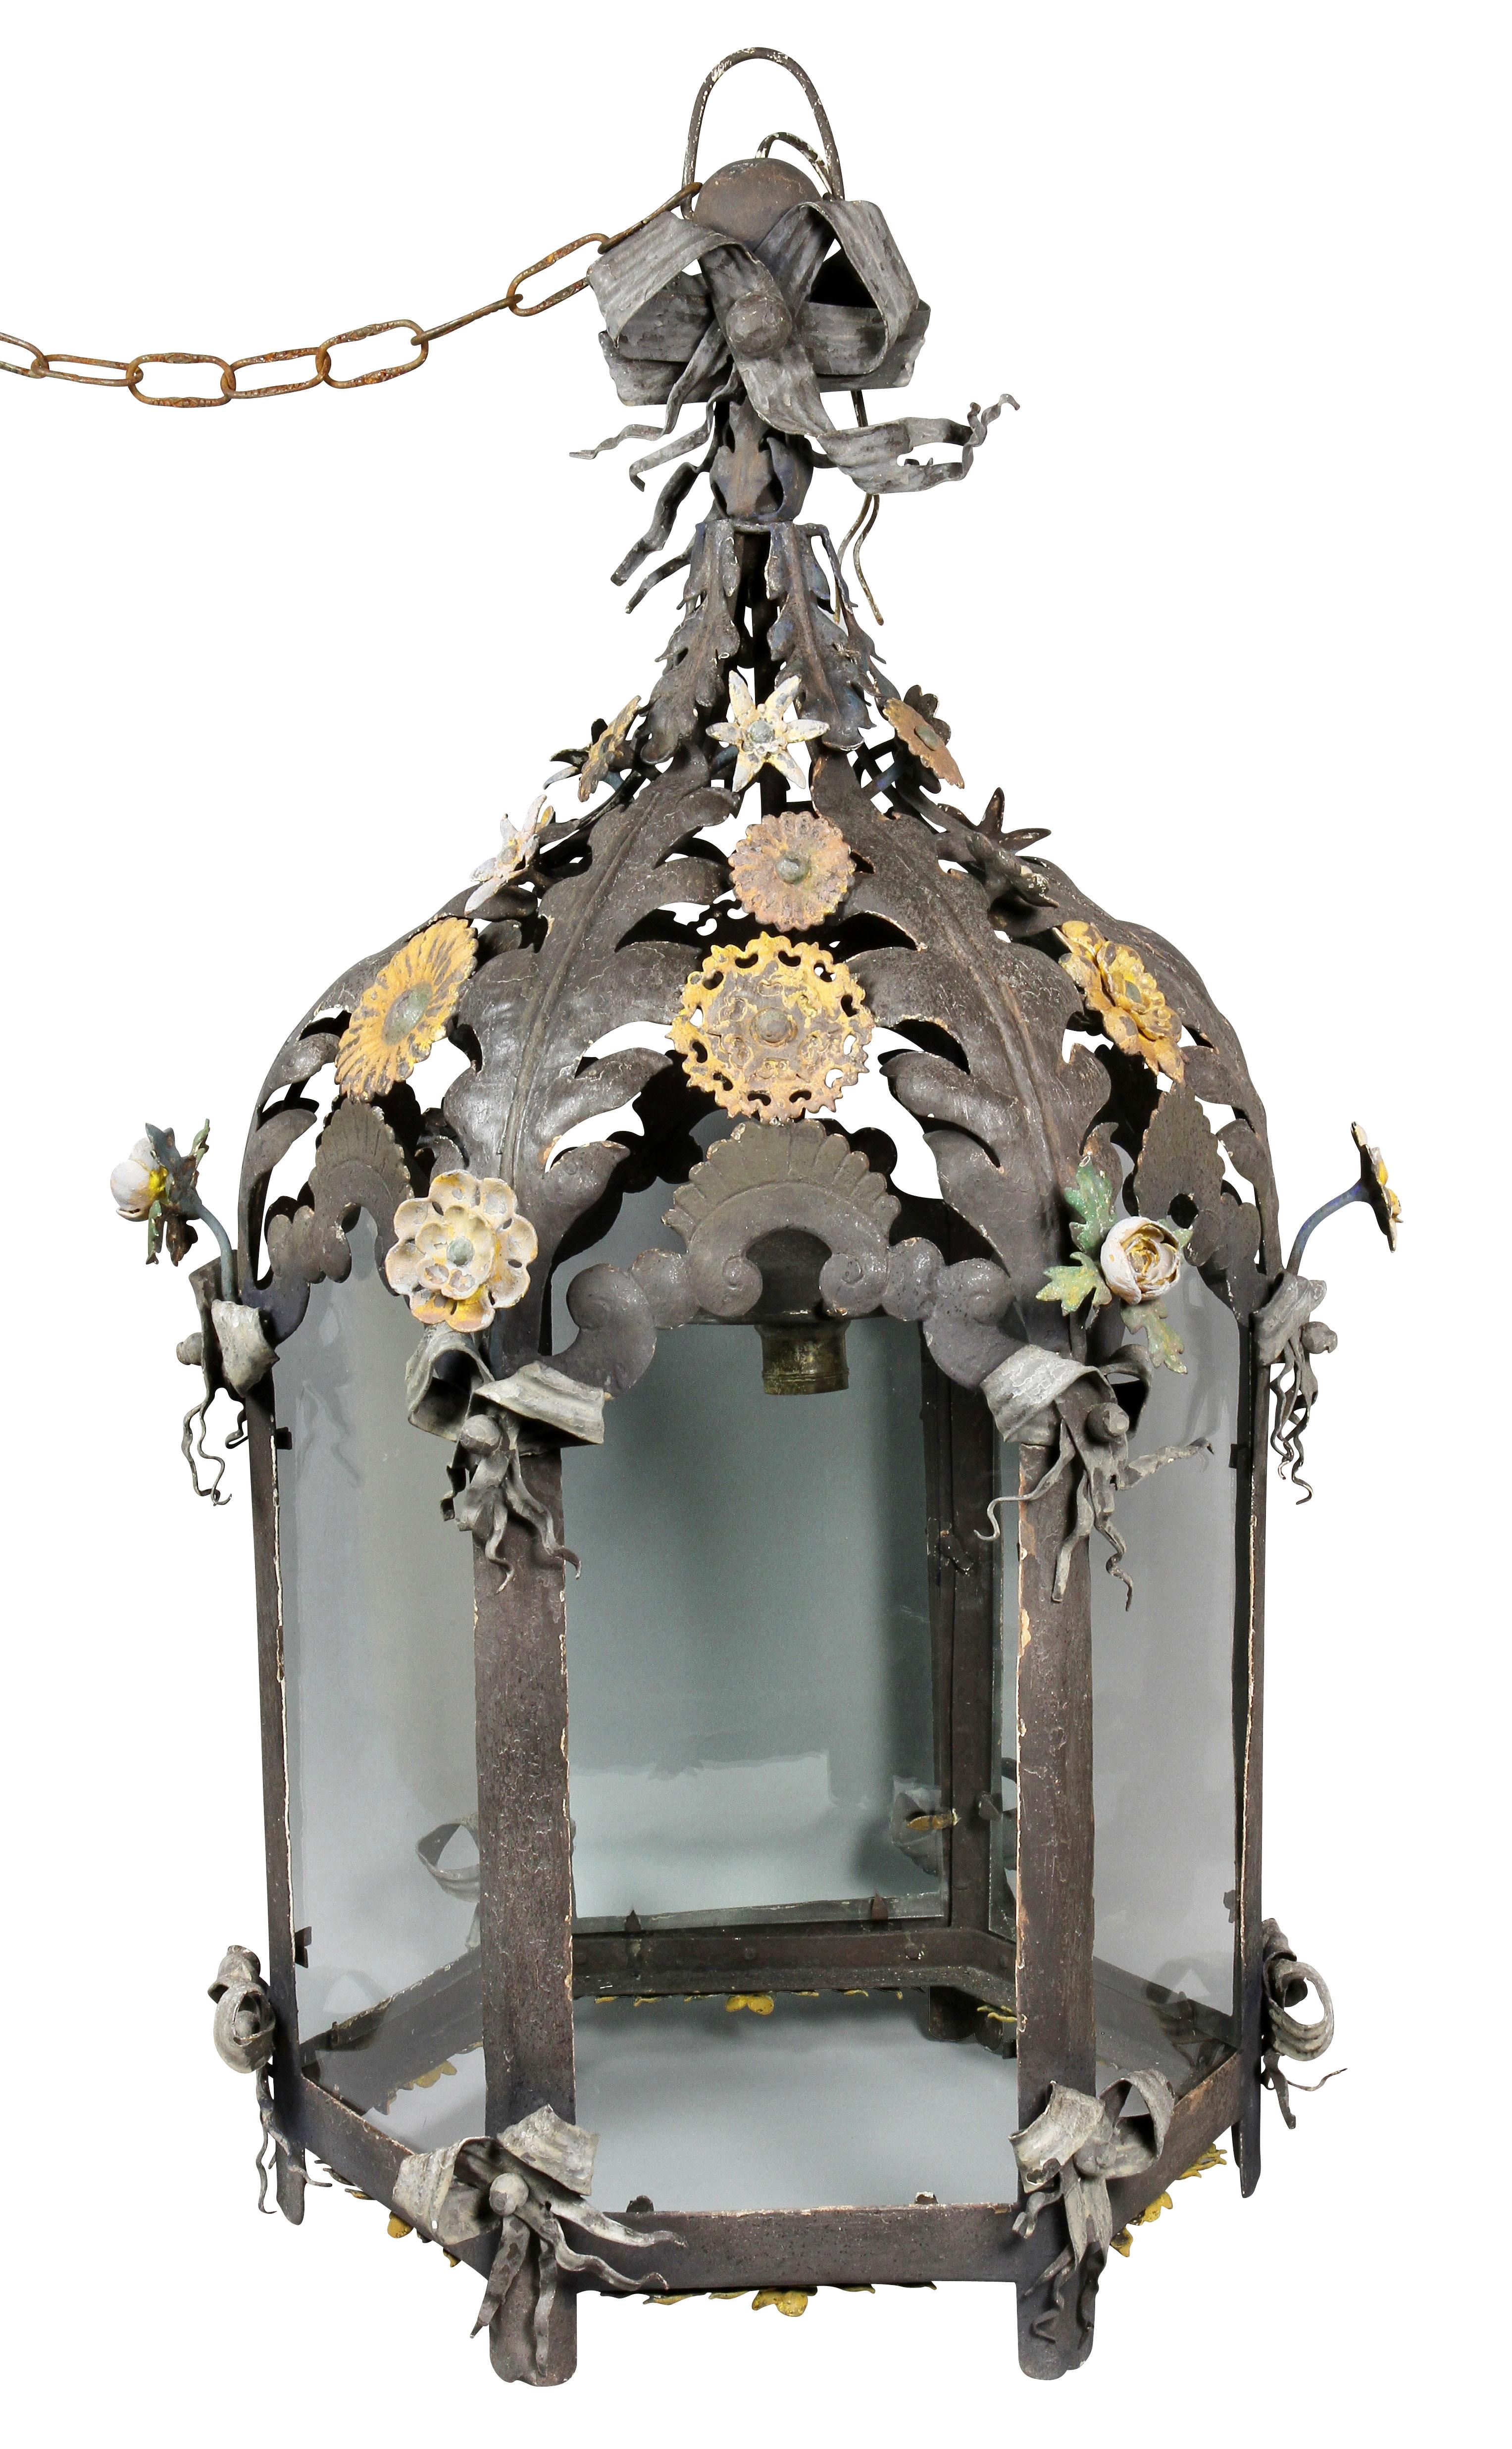 Domed top with leaf decoration and flower heads, cylindrical body with glass panels.